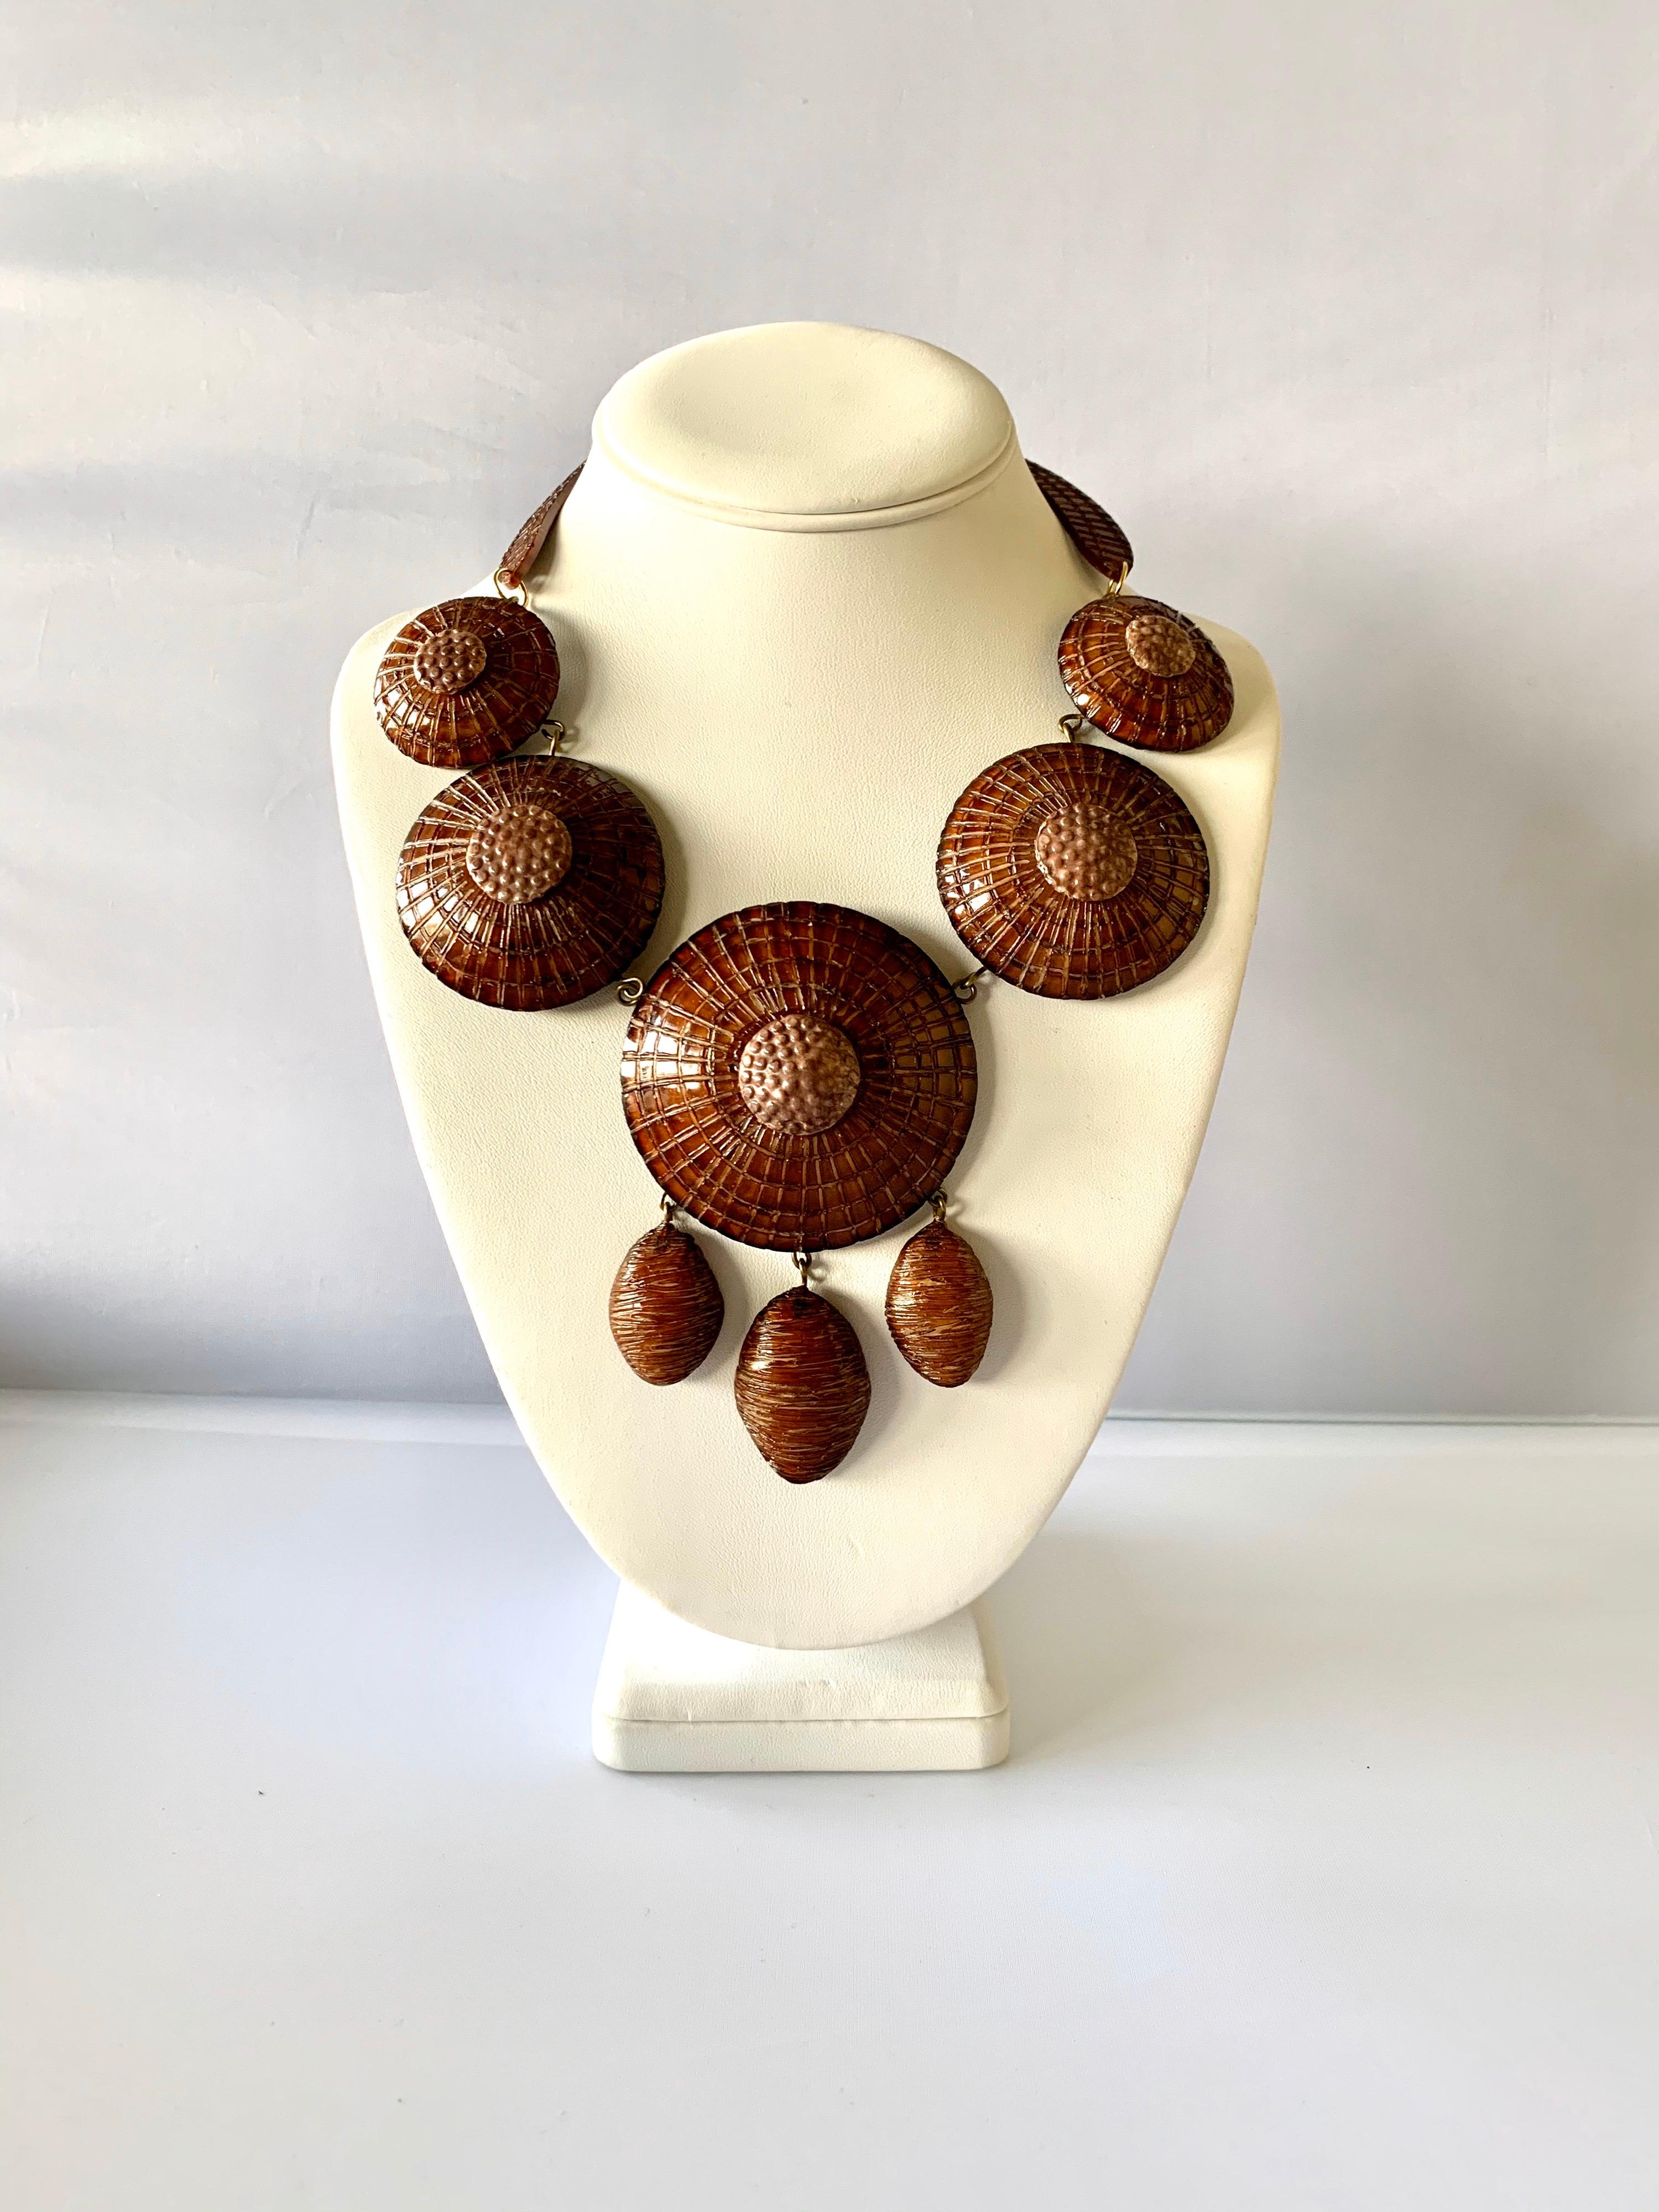 Contemporary architectural brown statement necklace comprised out of hand-manipulated enamel and resin. Made in Paris France, by Cilea.